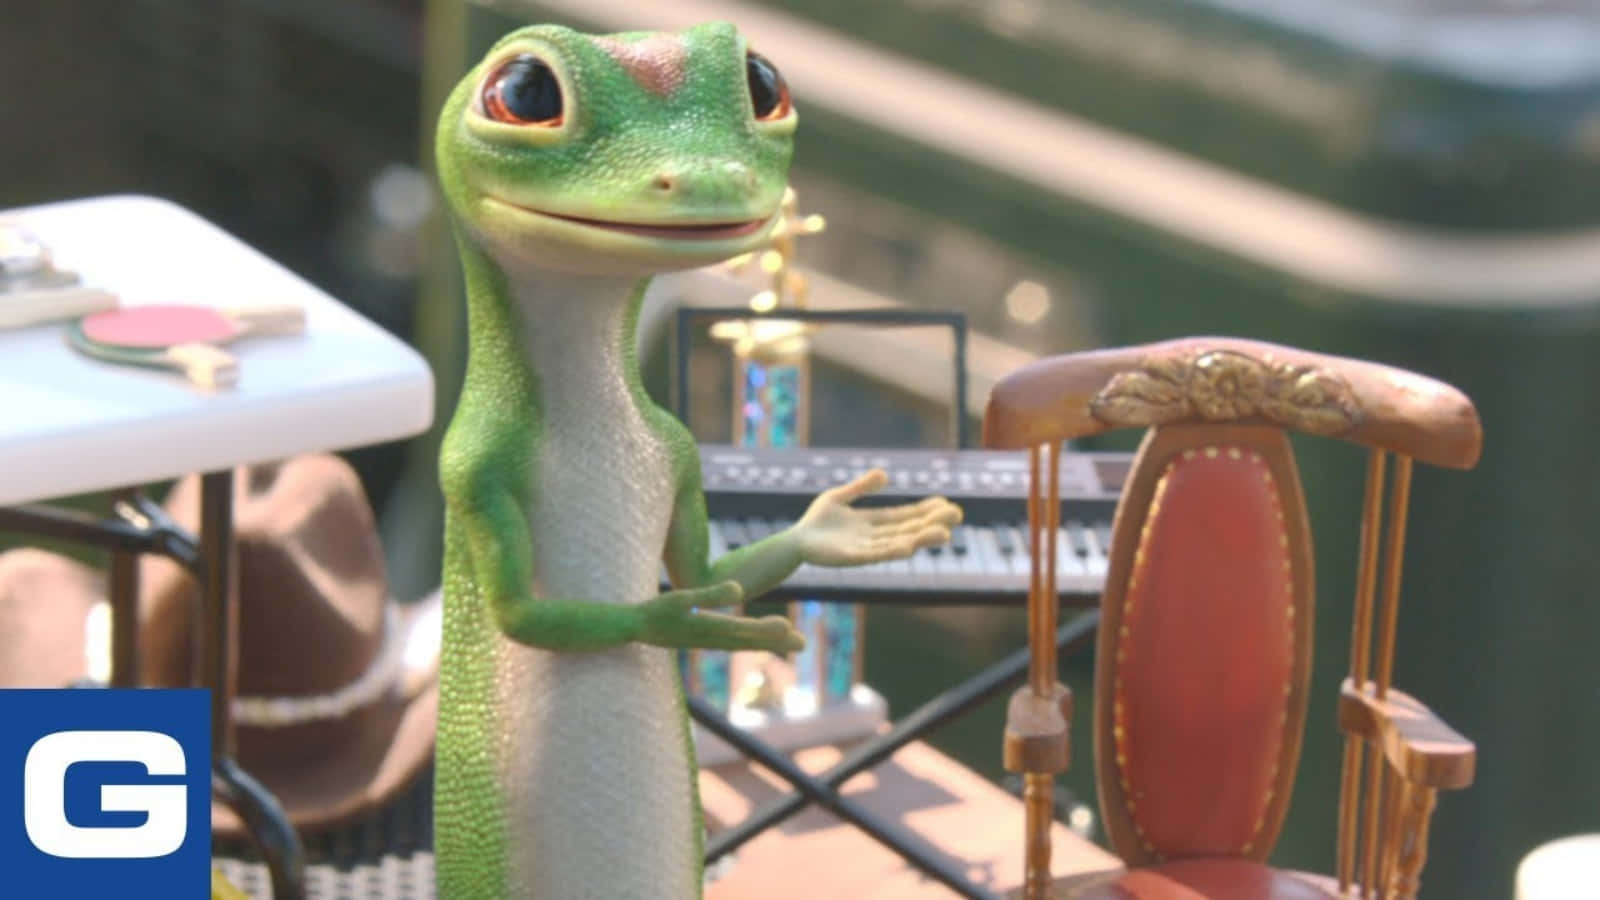 A Green Gecko Is Standing Next To A Piano